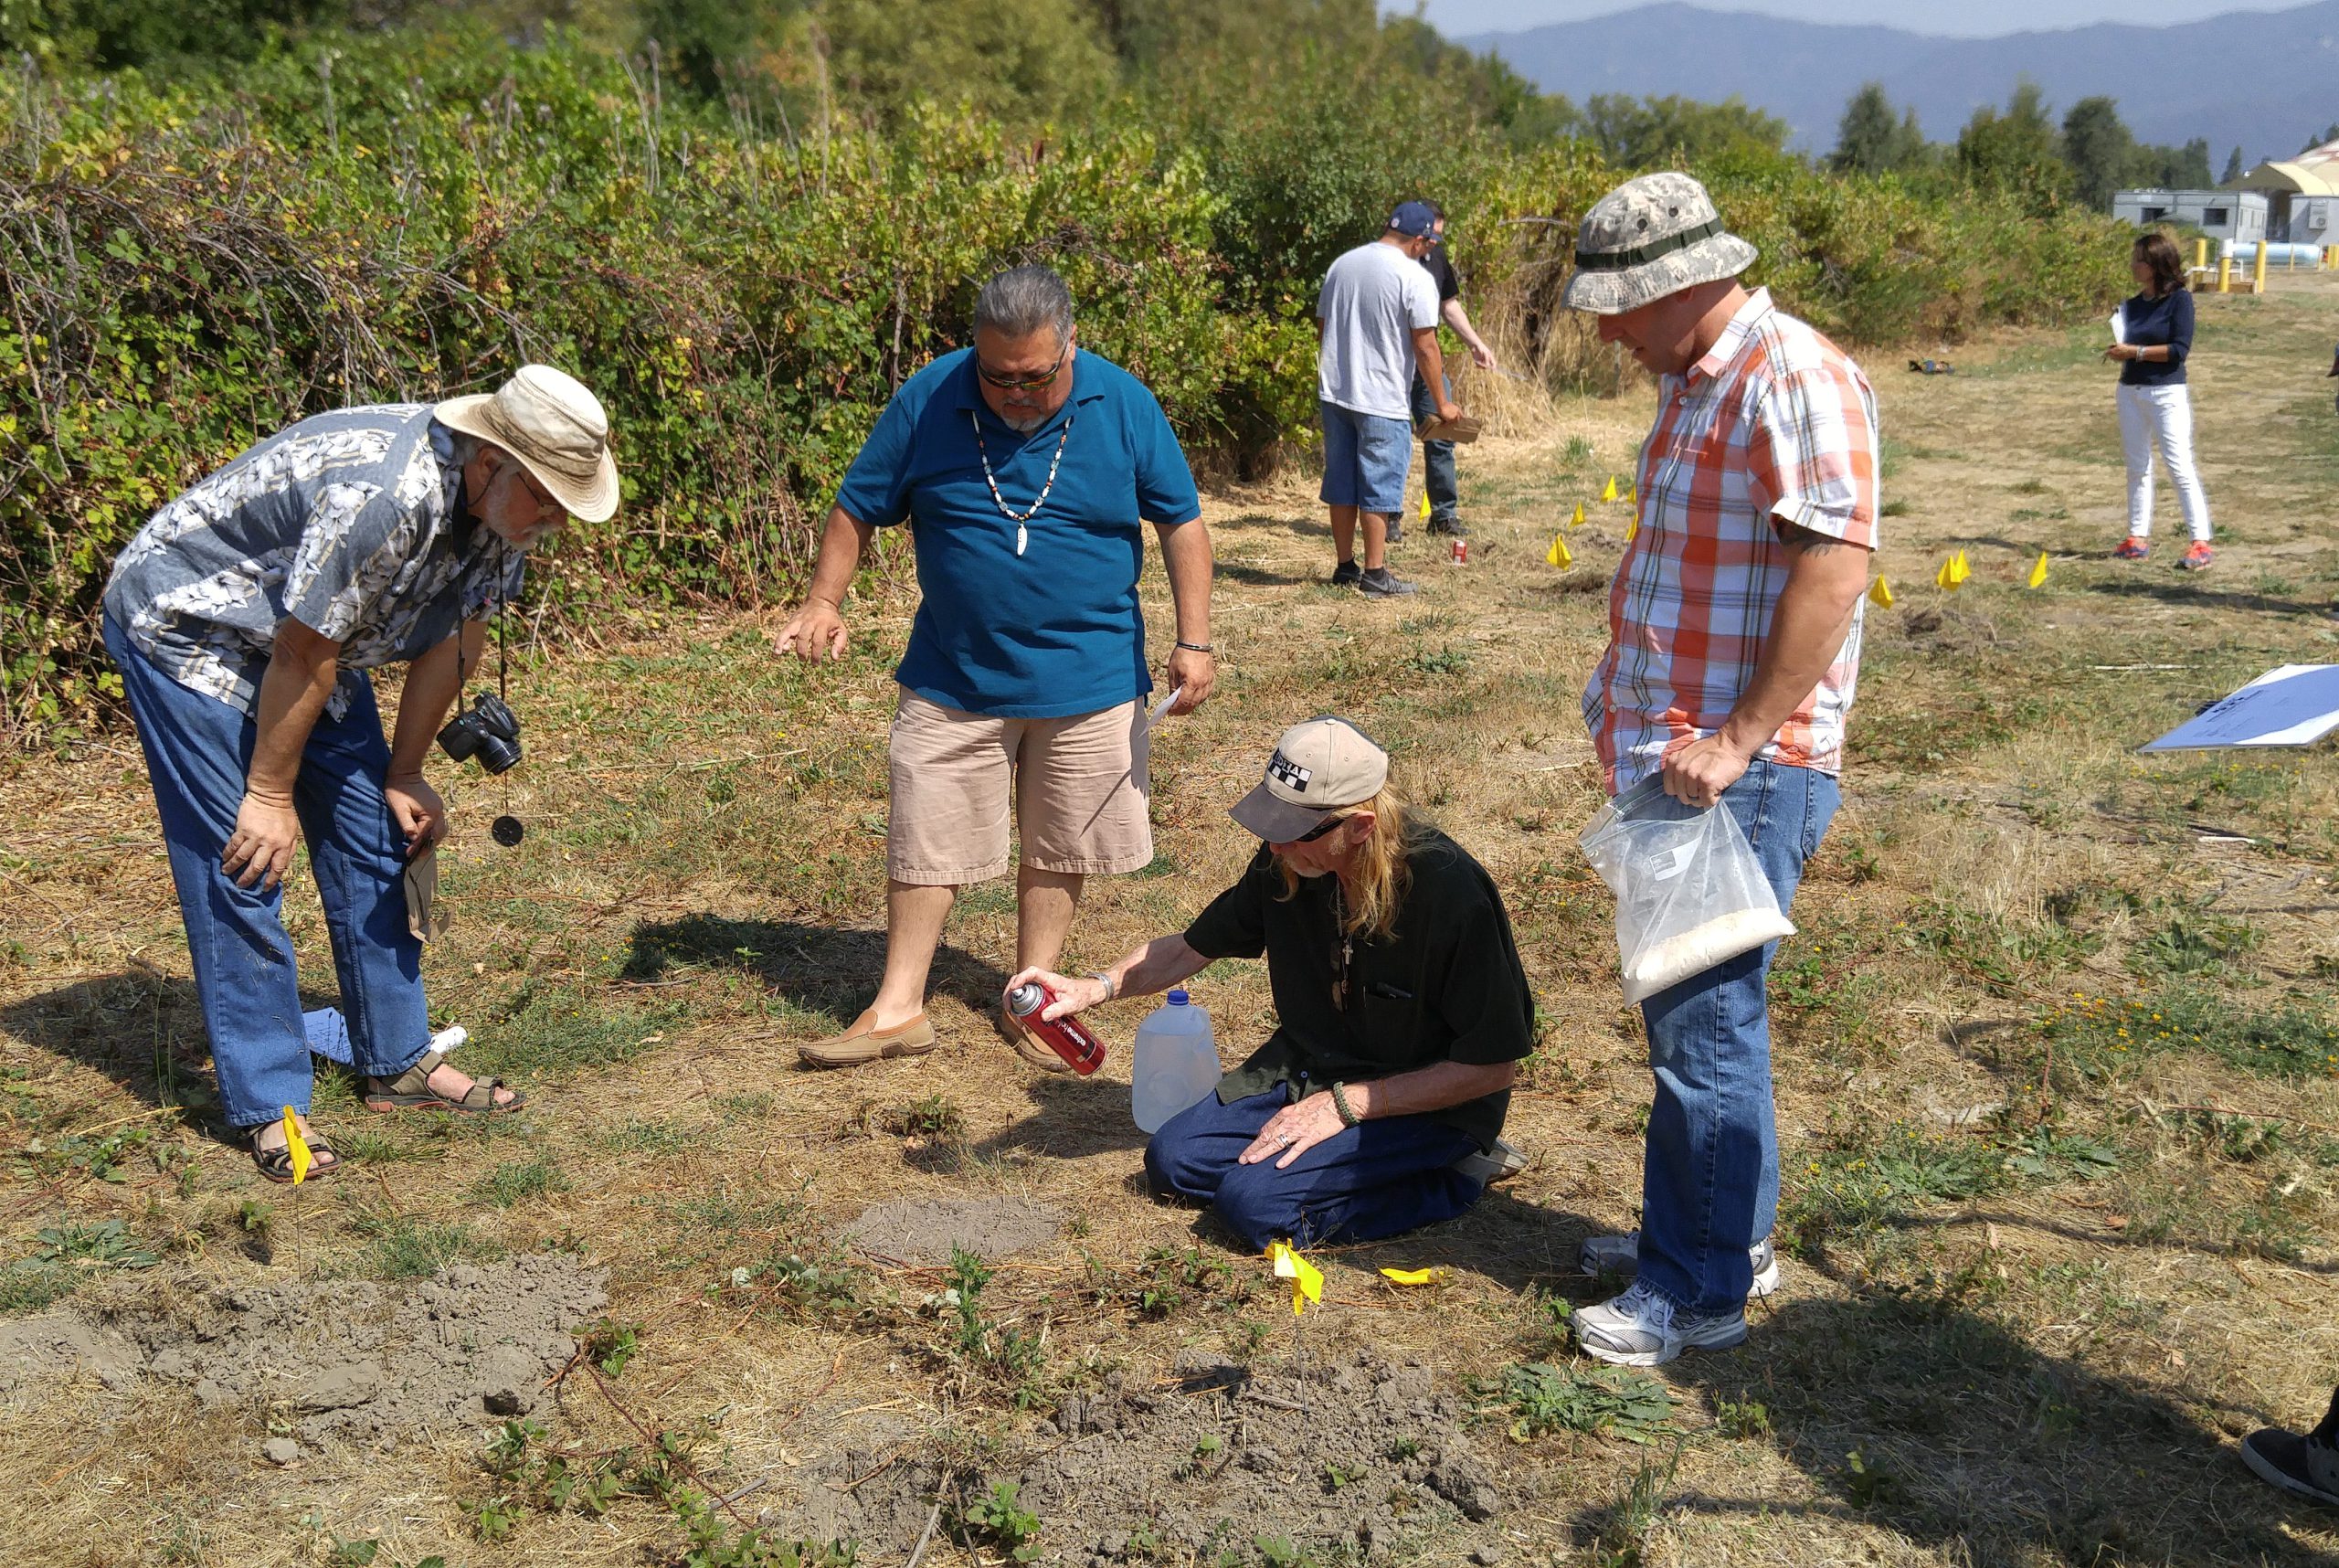 Four people assessing a natural site